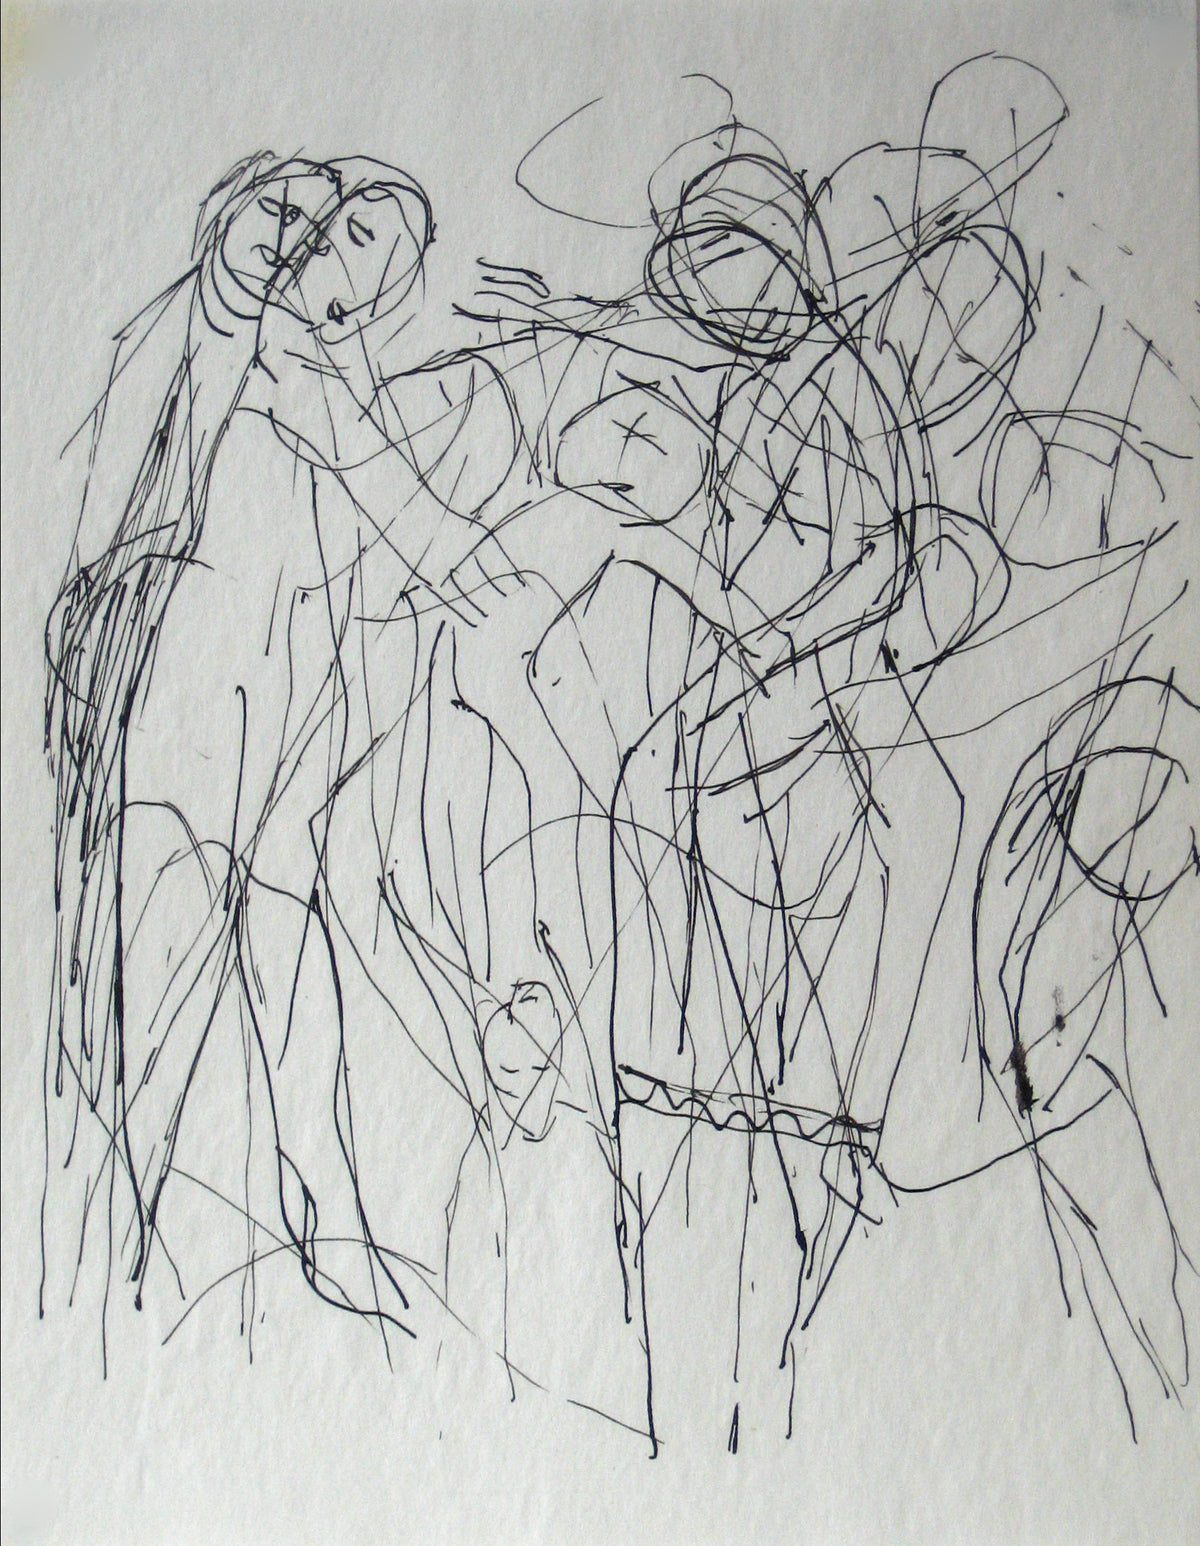 Sketch of Multiple Abstracted Figures &lt;br&gt;Early-Mid 20th Century Ink on Paper &lt;br&gt;&lt;br&gt;#13580